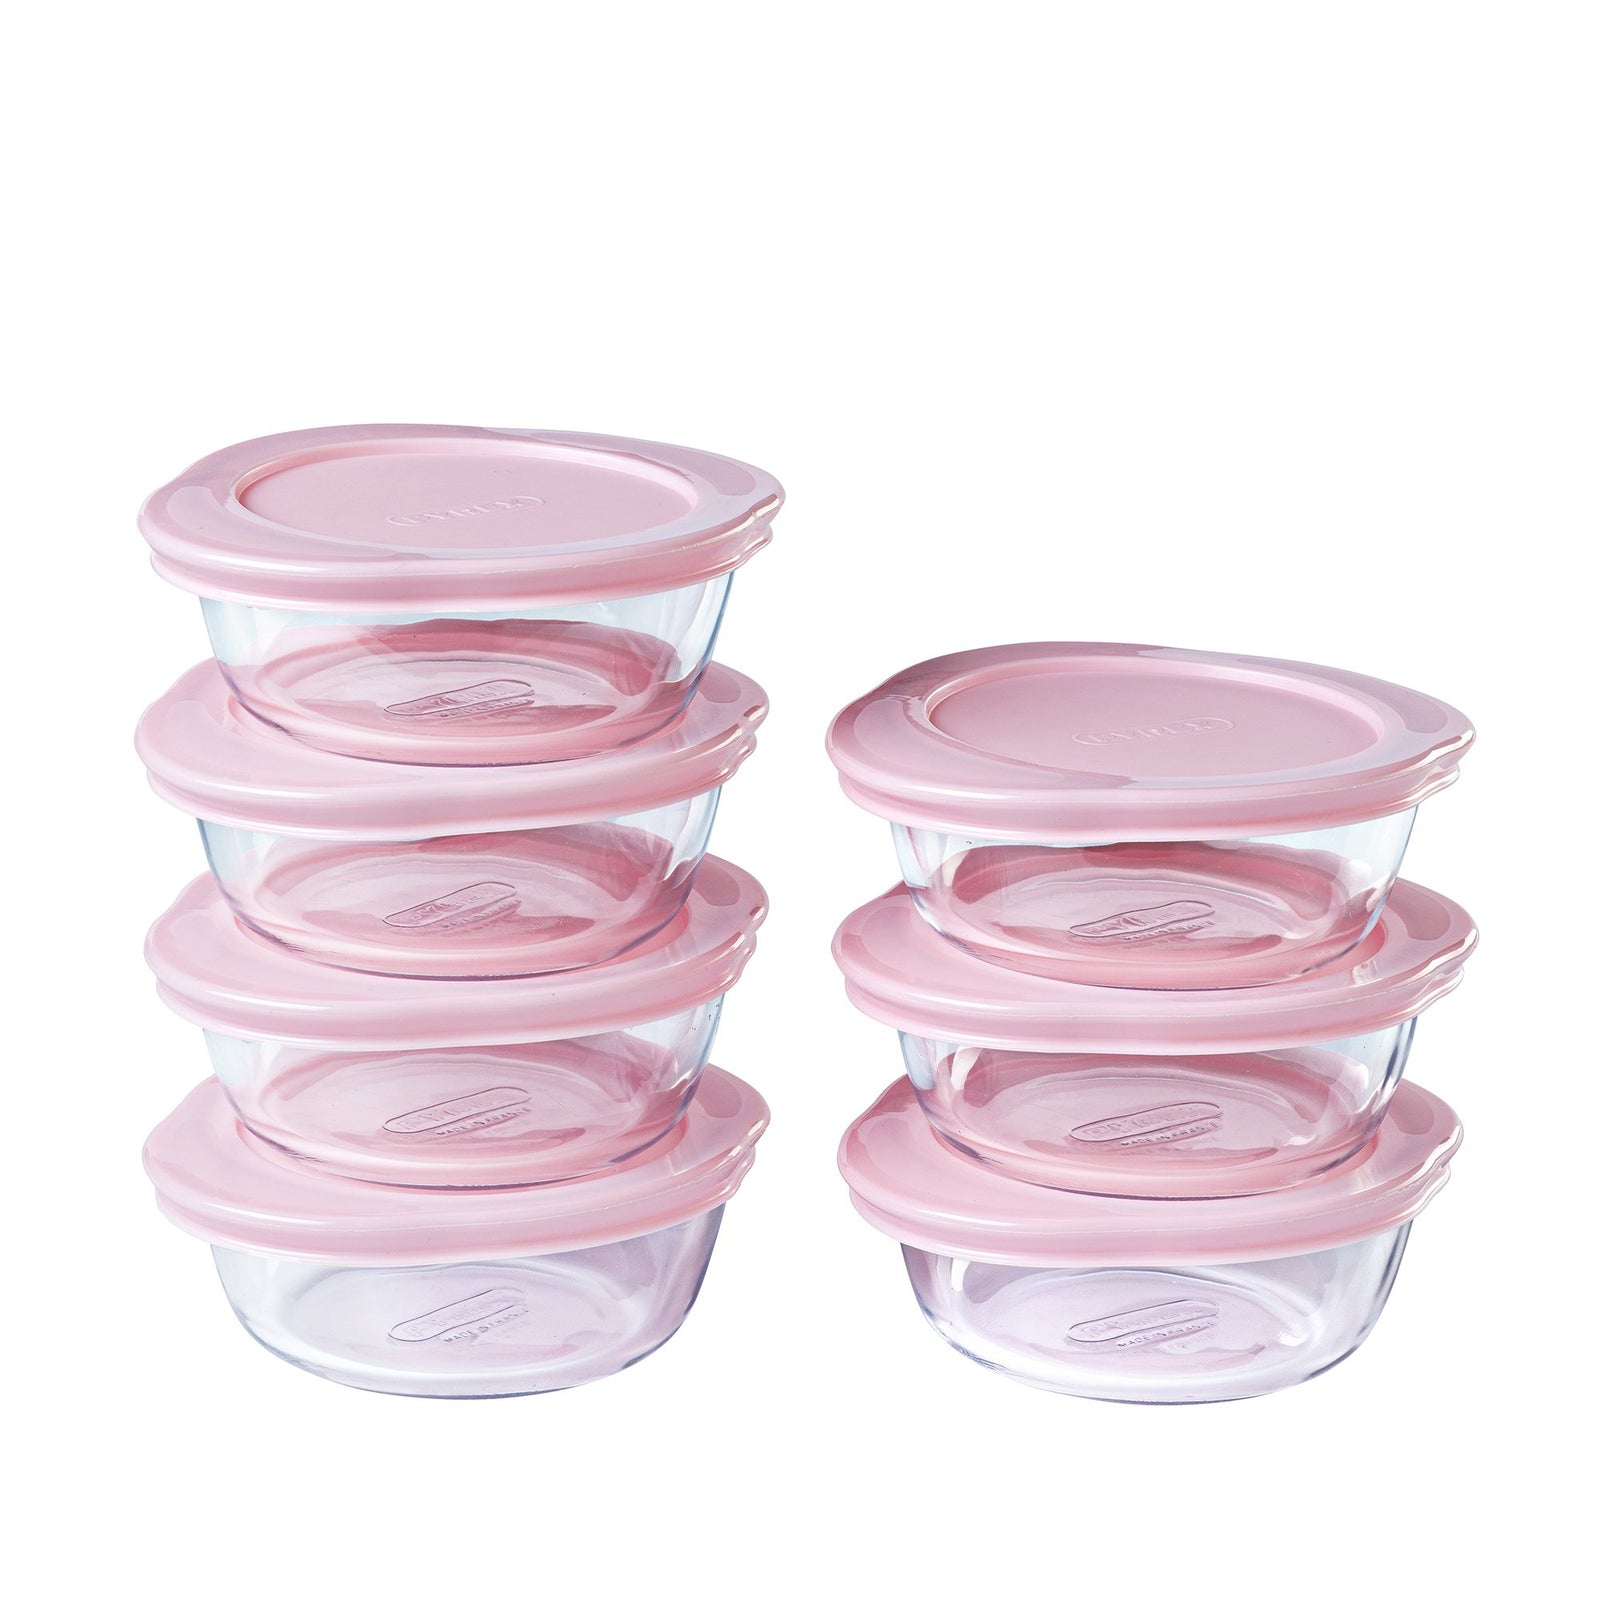 Food storage containers: The best deals on Pyrex, Rubbermaid and